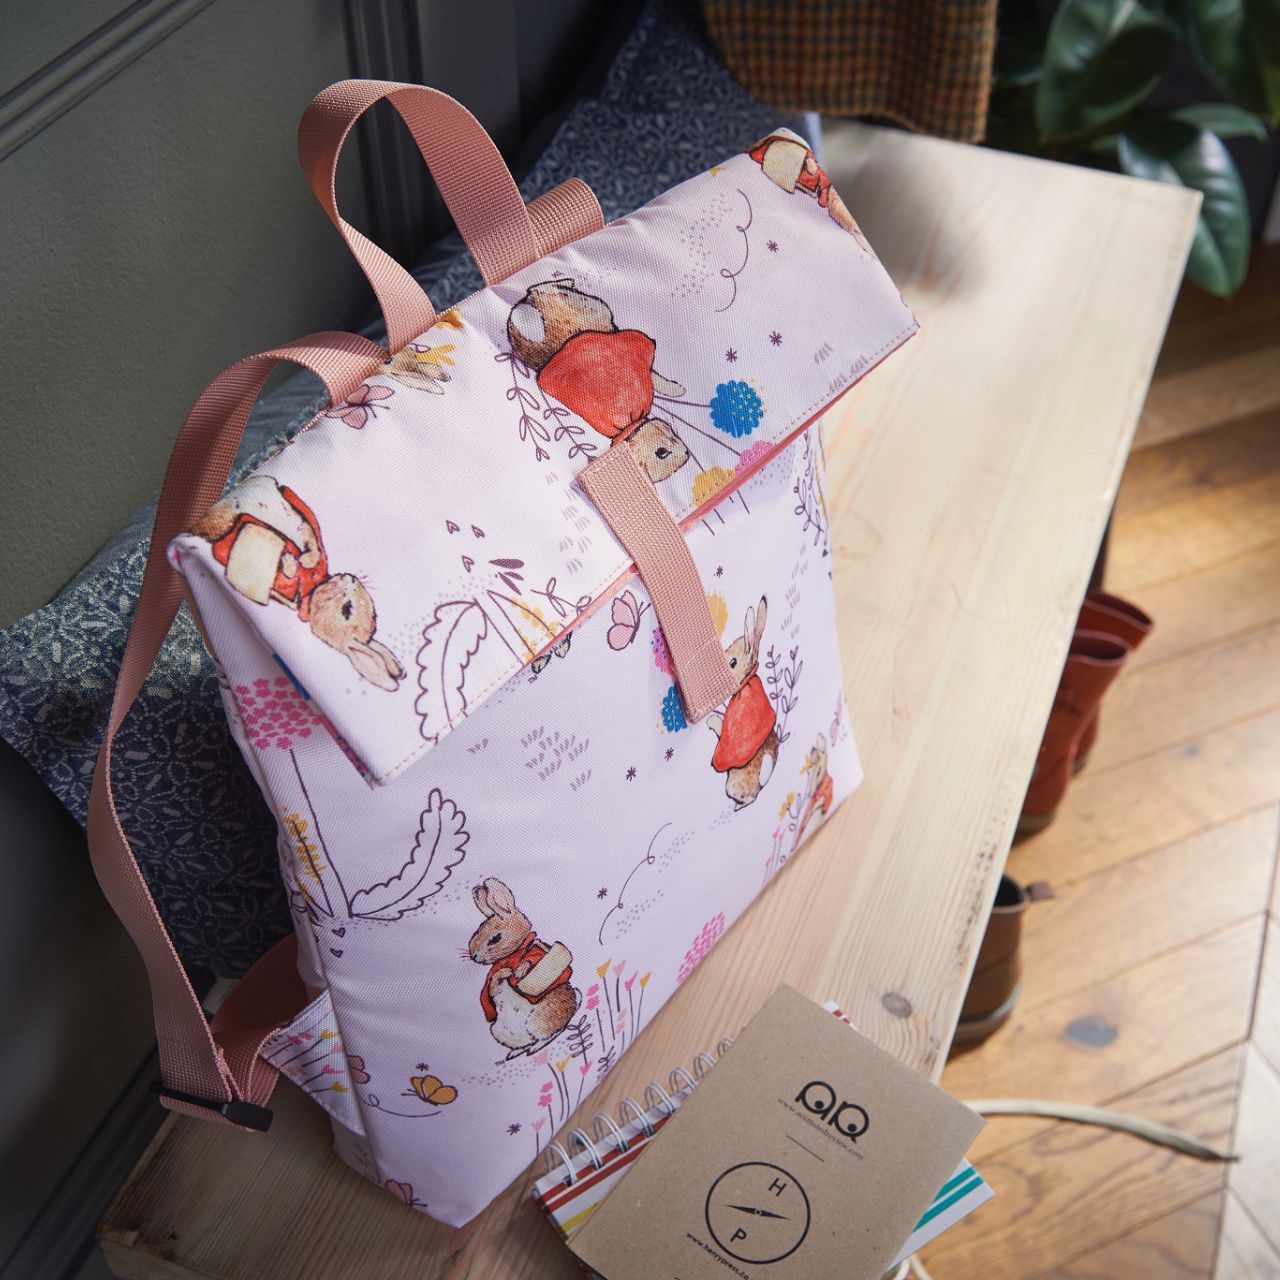 Beatrix Potter Flopsy Children’s Backpack  This adorable Flopsy bag is made from high quality material and also features a waterproof fabric lining, perfect for outdoor adventures, sleepovers and school. This is a fun and practical backpack, has been perfectly detailed with original illustrations, taken from the Beatrix Potter stories.